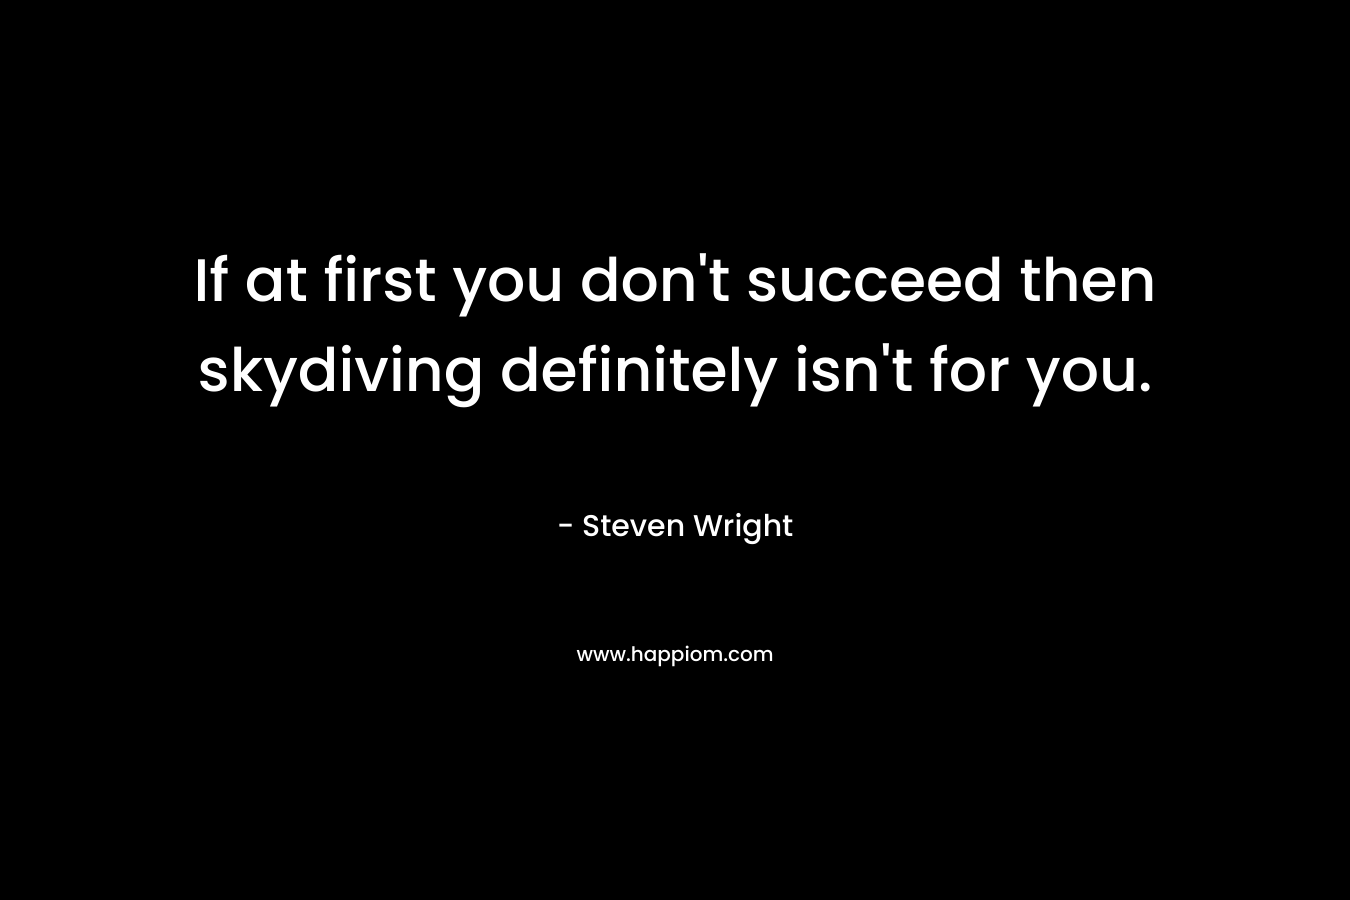 If at first you don’t succeed then skydiving definitely isn’t for you. – Steven Wright